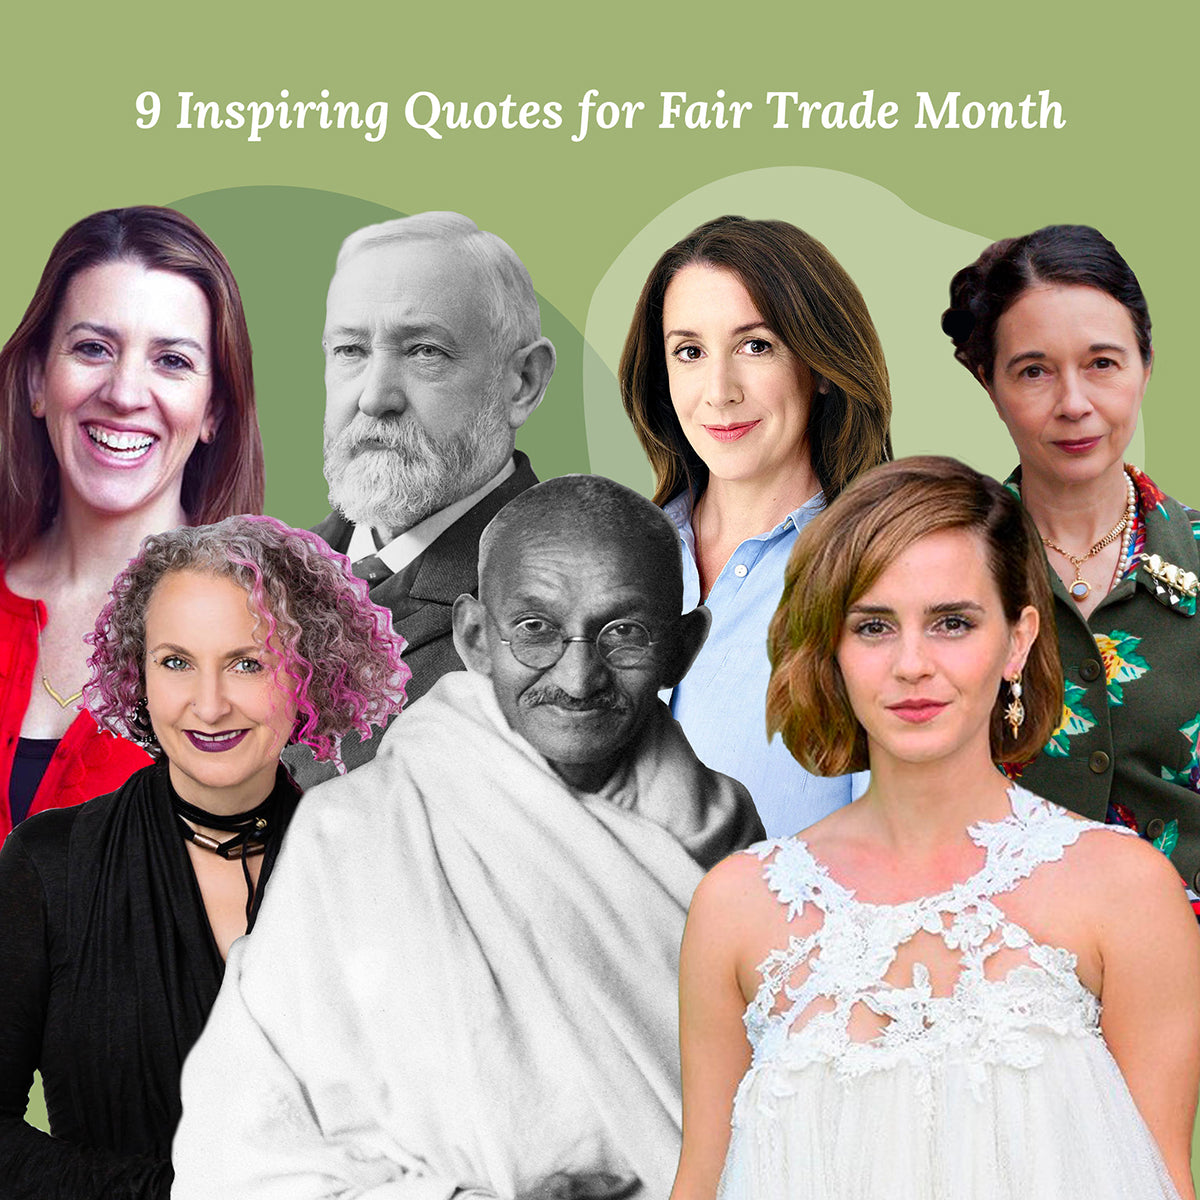 Inspiring Quotes for Fair Trade Month